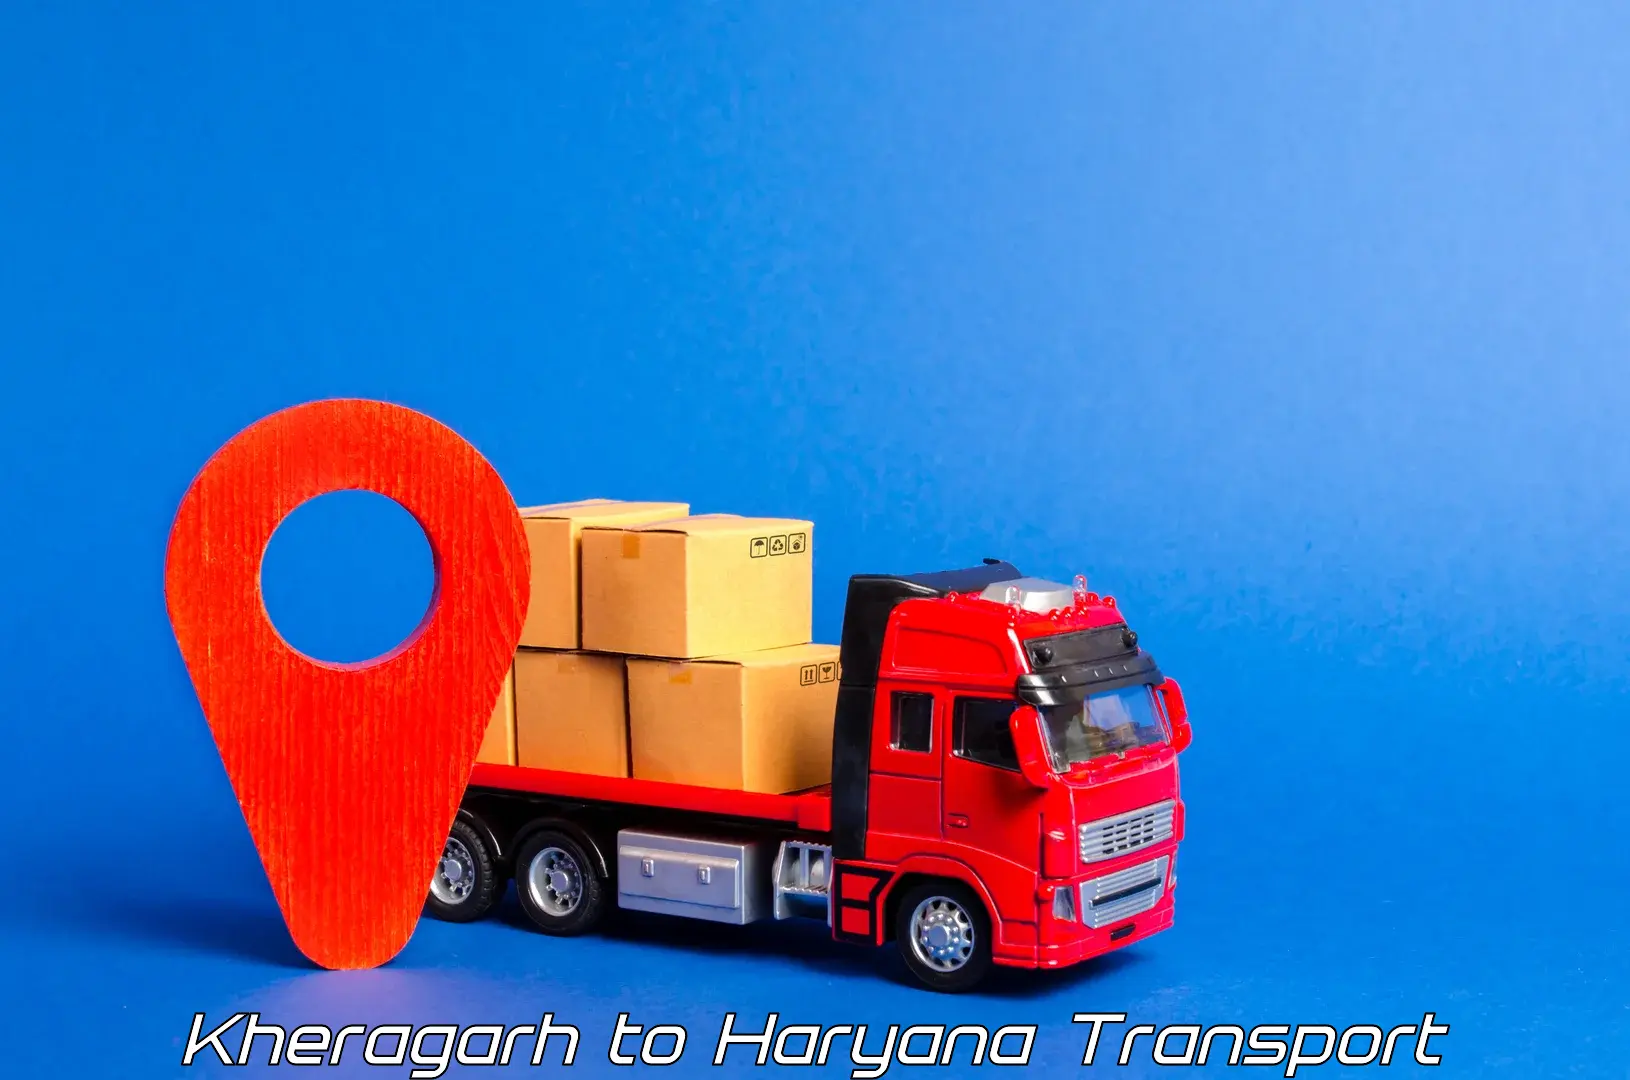 Commercial transport service Kheragarh to Pinjore